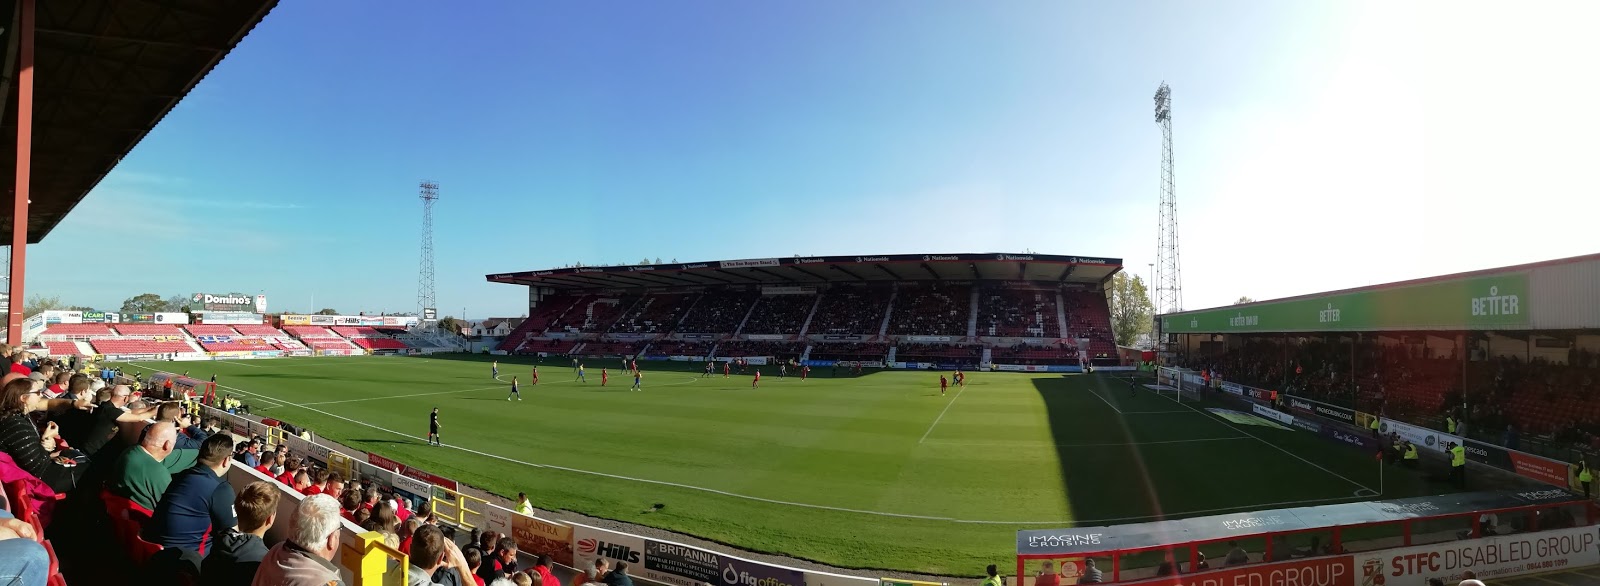 Inside view of The County Ground